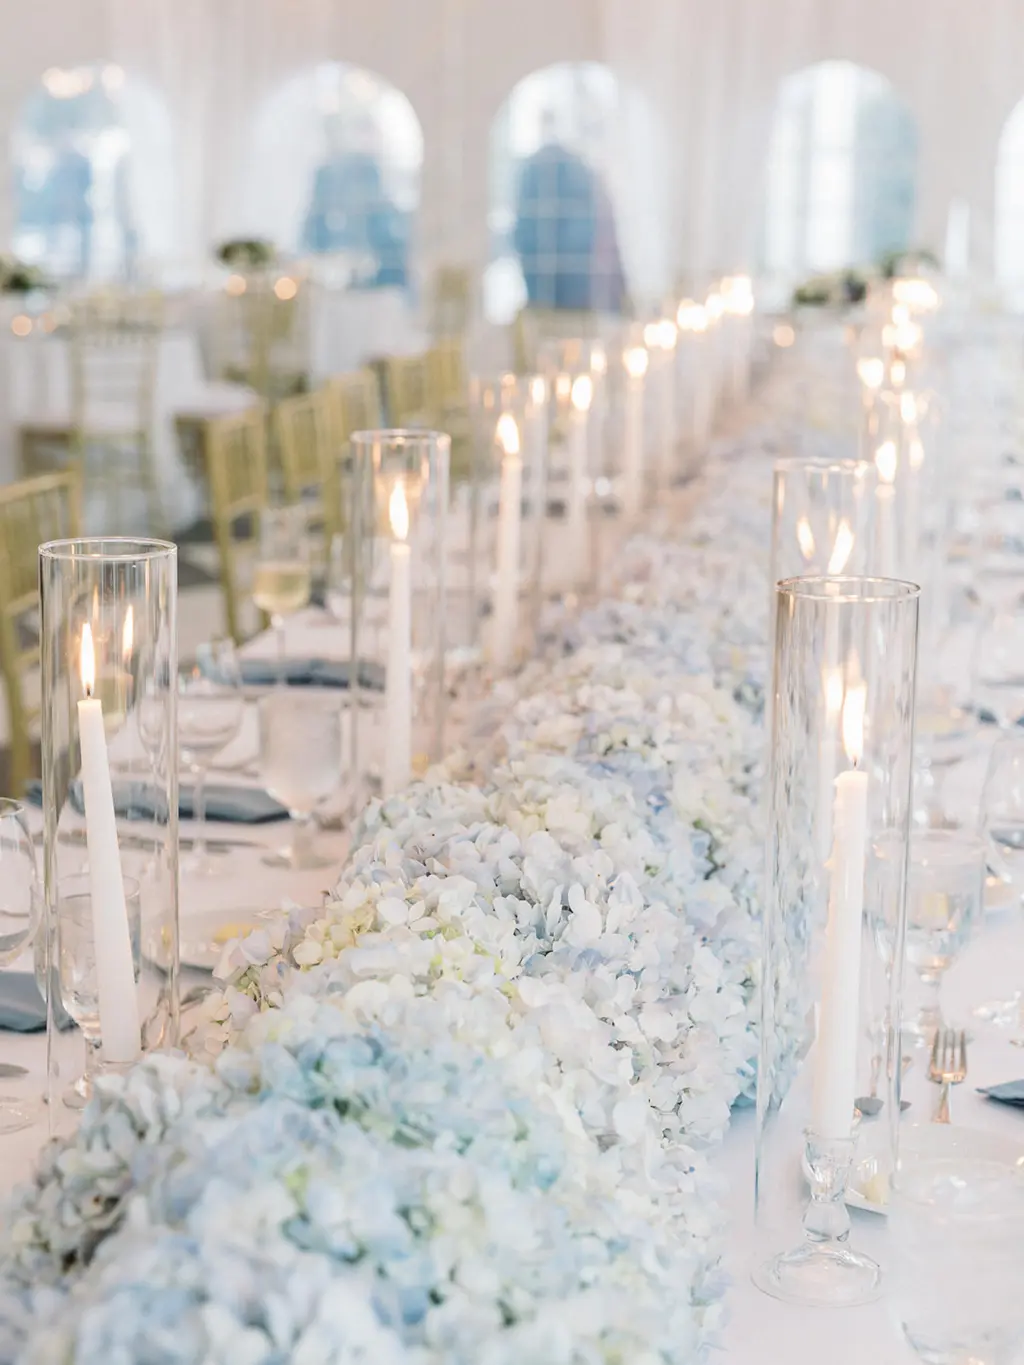 Classic Blue and White Hydrangea Garland Centerpiece with Taper Candles Inside Hurricane Glass Tube for Feasting Table | Classic Blue and White Wedding Reception Inspiration | Tampa Bay Florist Save The Date Florida